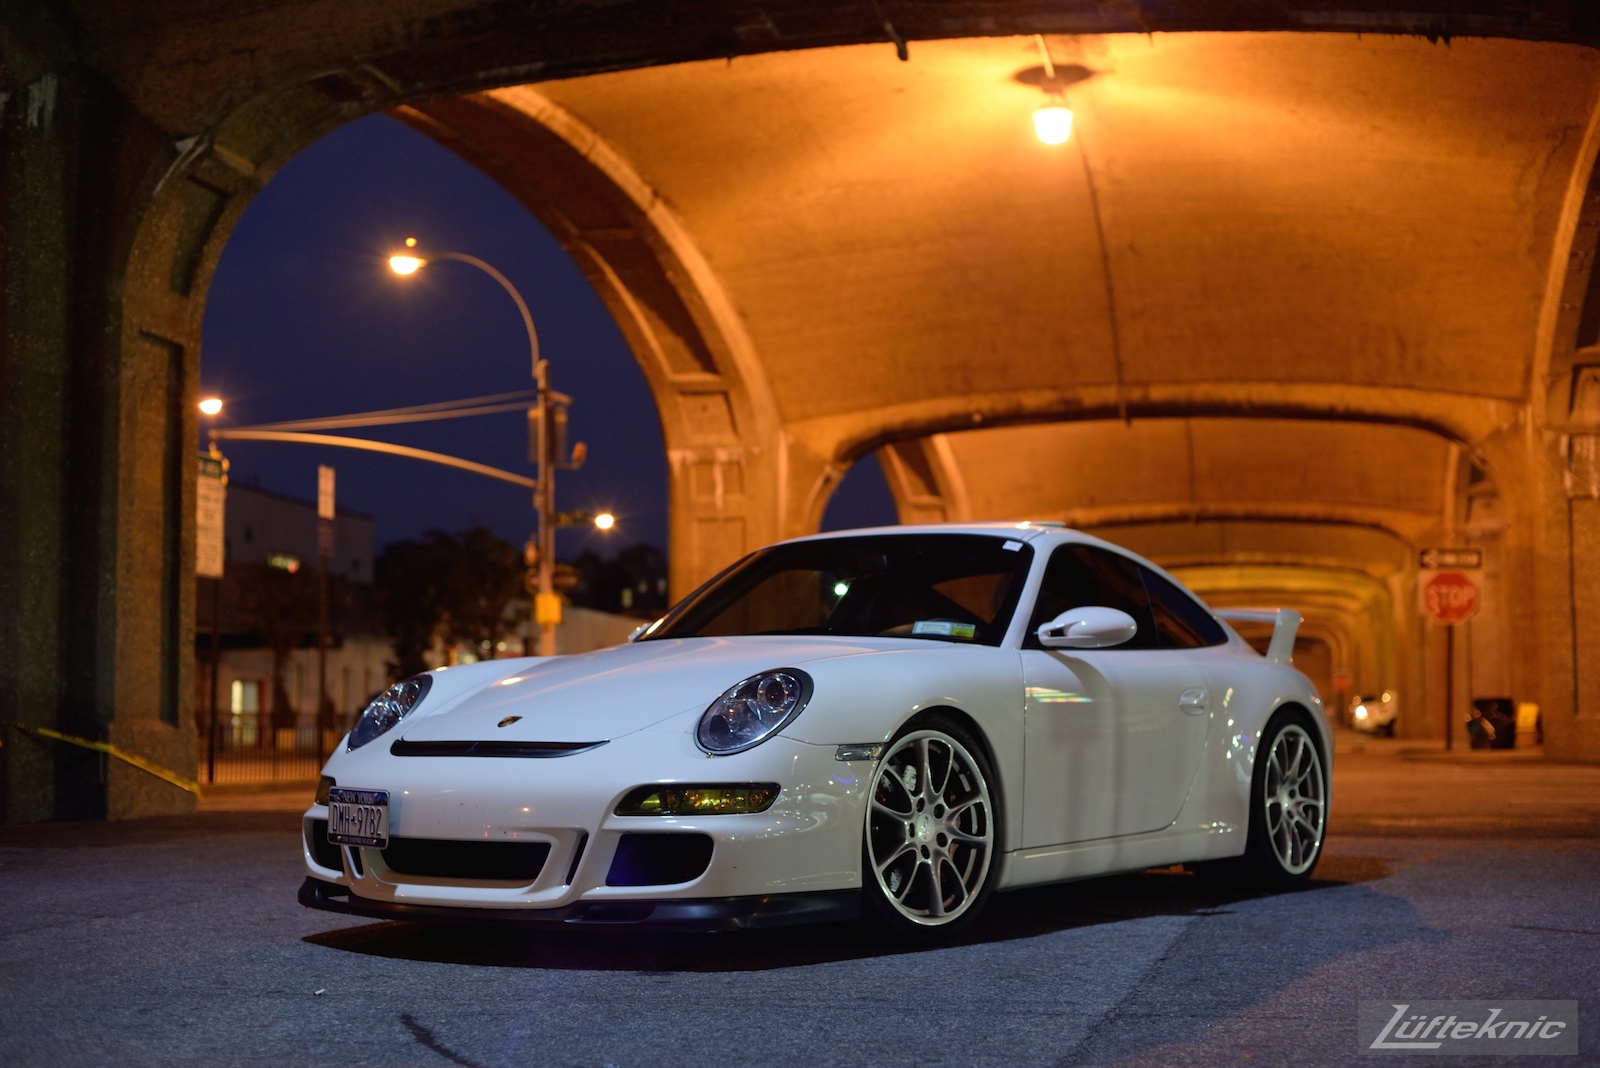 A white 997 GT3 viewed from the front under the 7 train bridge on Queens blvd at night.